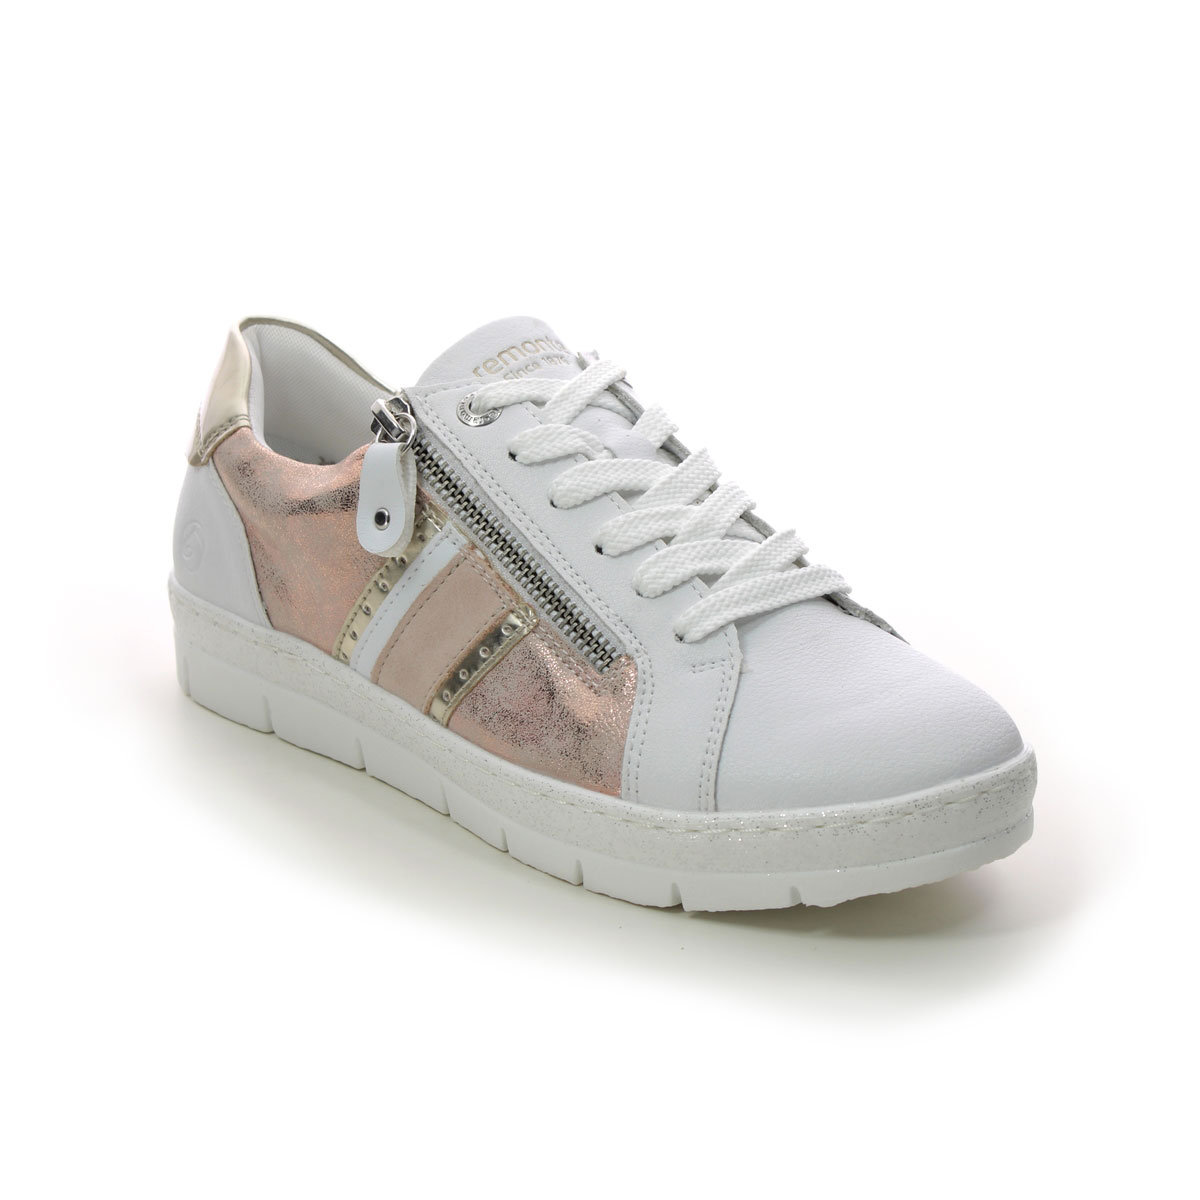 Remonte Ravenna 11 White Rose Gold Womens Trainers D5827-90 In Size 40 In Plain White Rose Gold